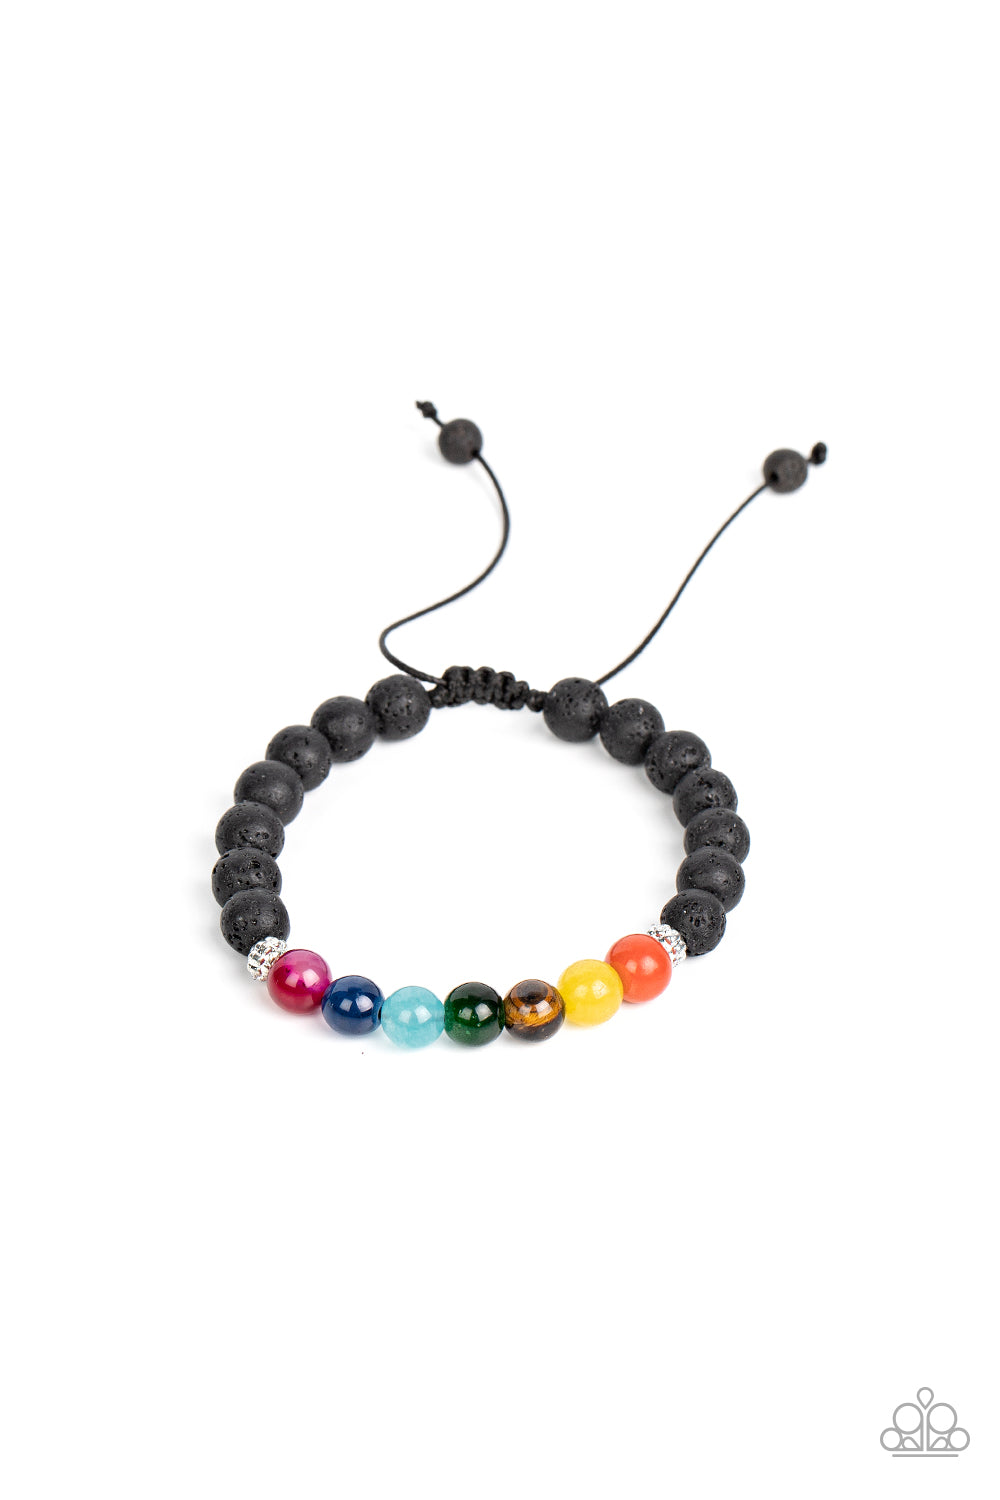 Paparazzi Accessories Canyon Kaleidoscope - Multi A pair of textured silver accents flanks a rainbow of glassy stone beads along a black lava rock beaded cord, resulting in a rustic pop of color around the wrist. Features an adjustable sliding knot closur